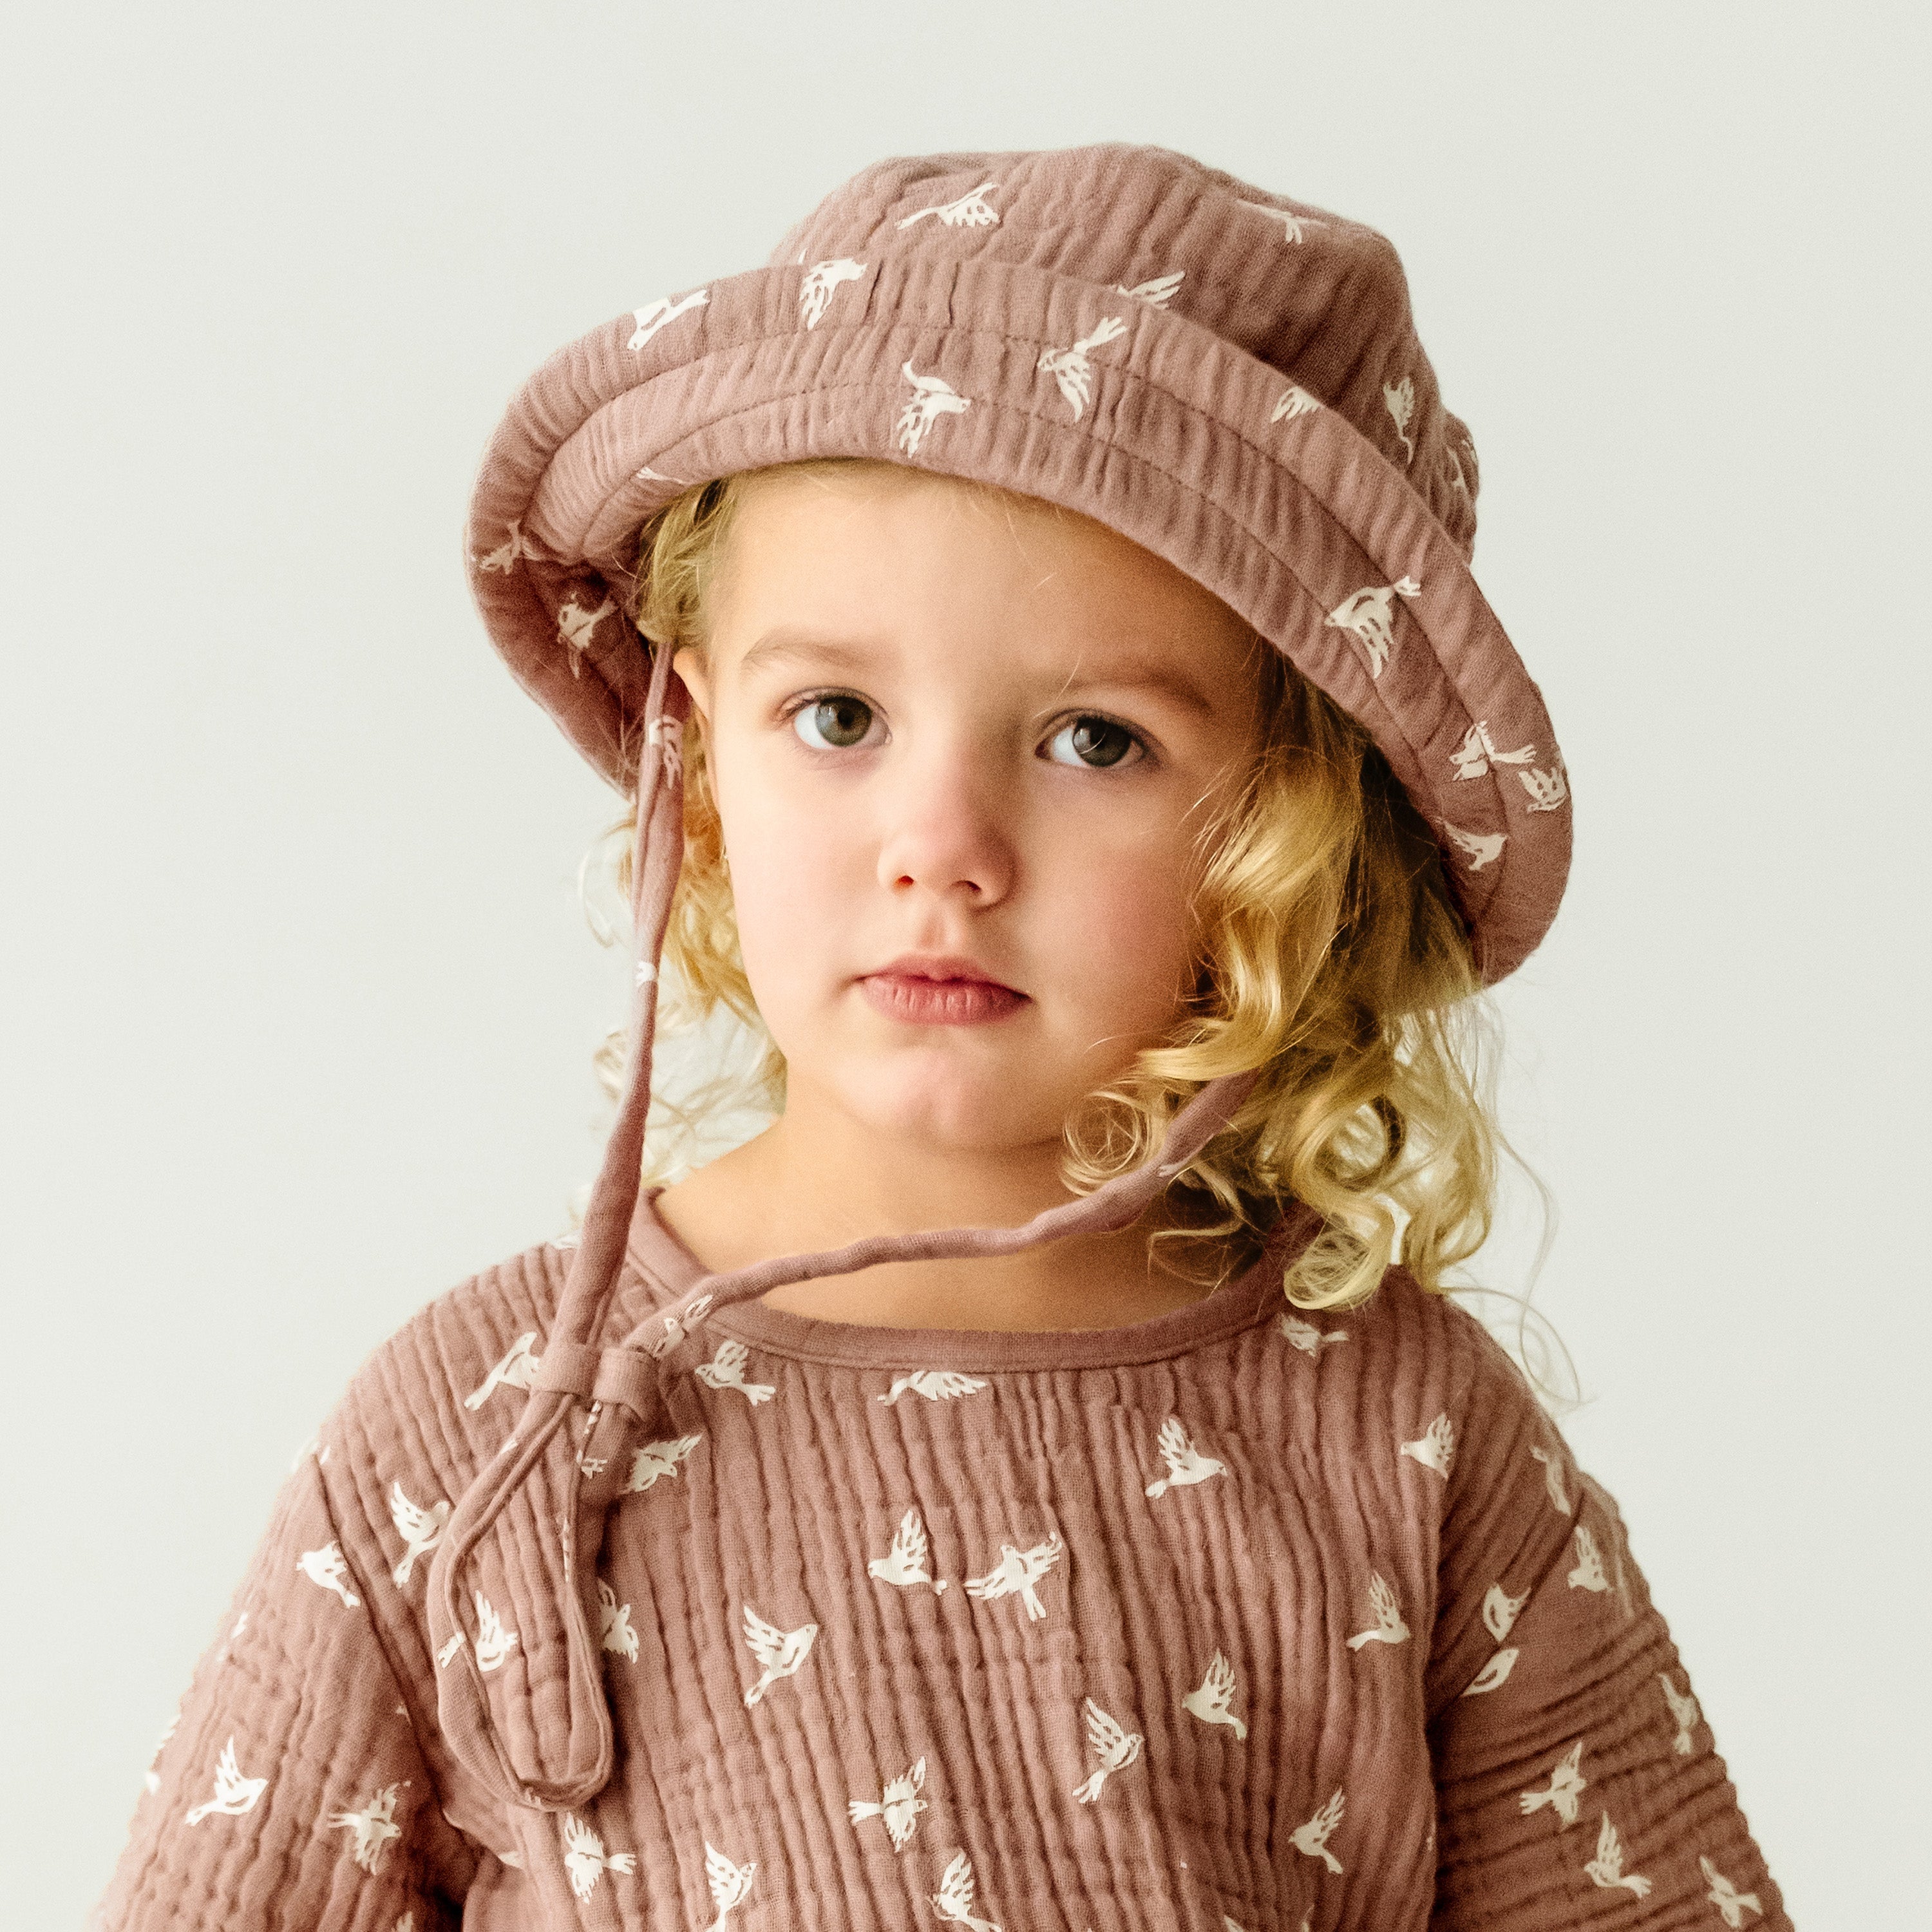 A young boy with curly blonde hair wearing a Makemake Organics Organic Muslin Bucket Sun Hat - Flock and a shirt patterned with white deer, looking thoughtfully to the side.